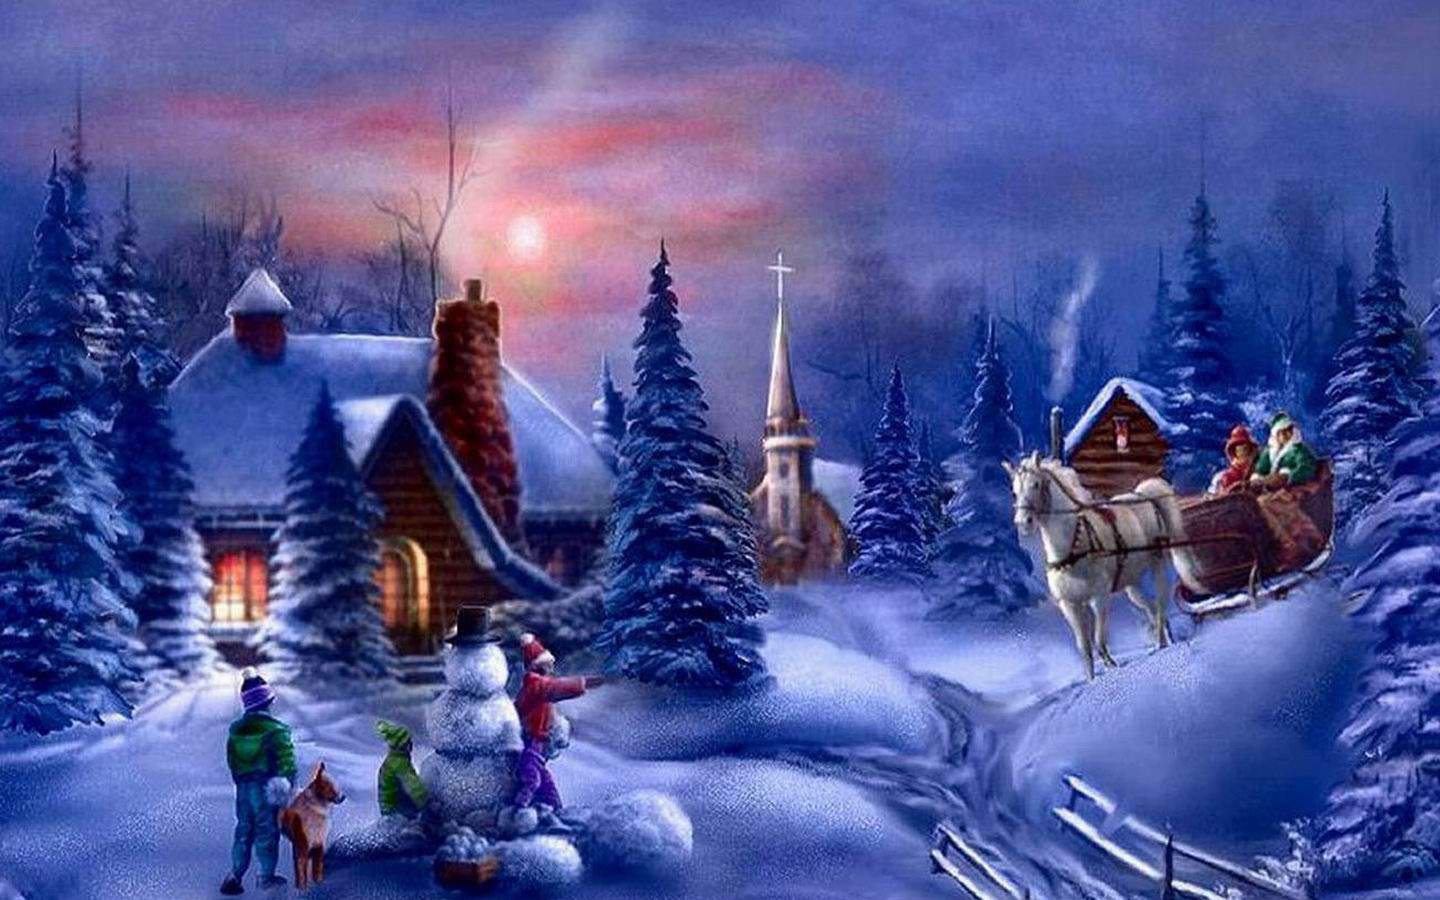  wallpaper backgrounds PC background wallpaper Pictures of christmas